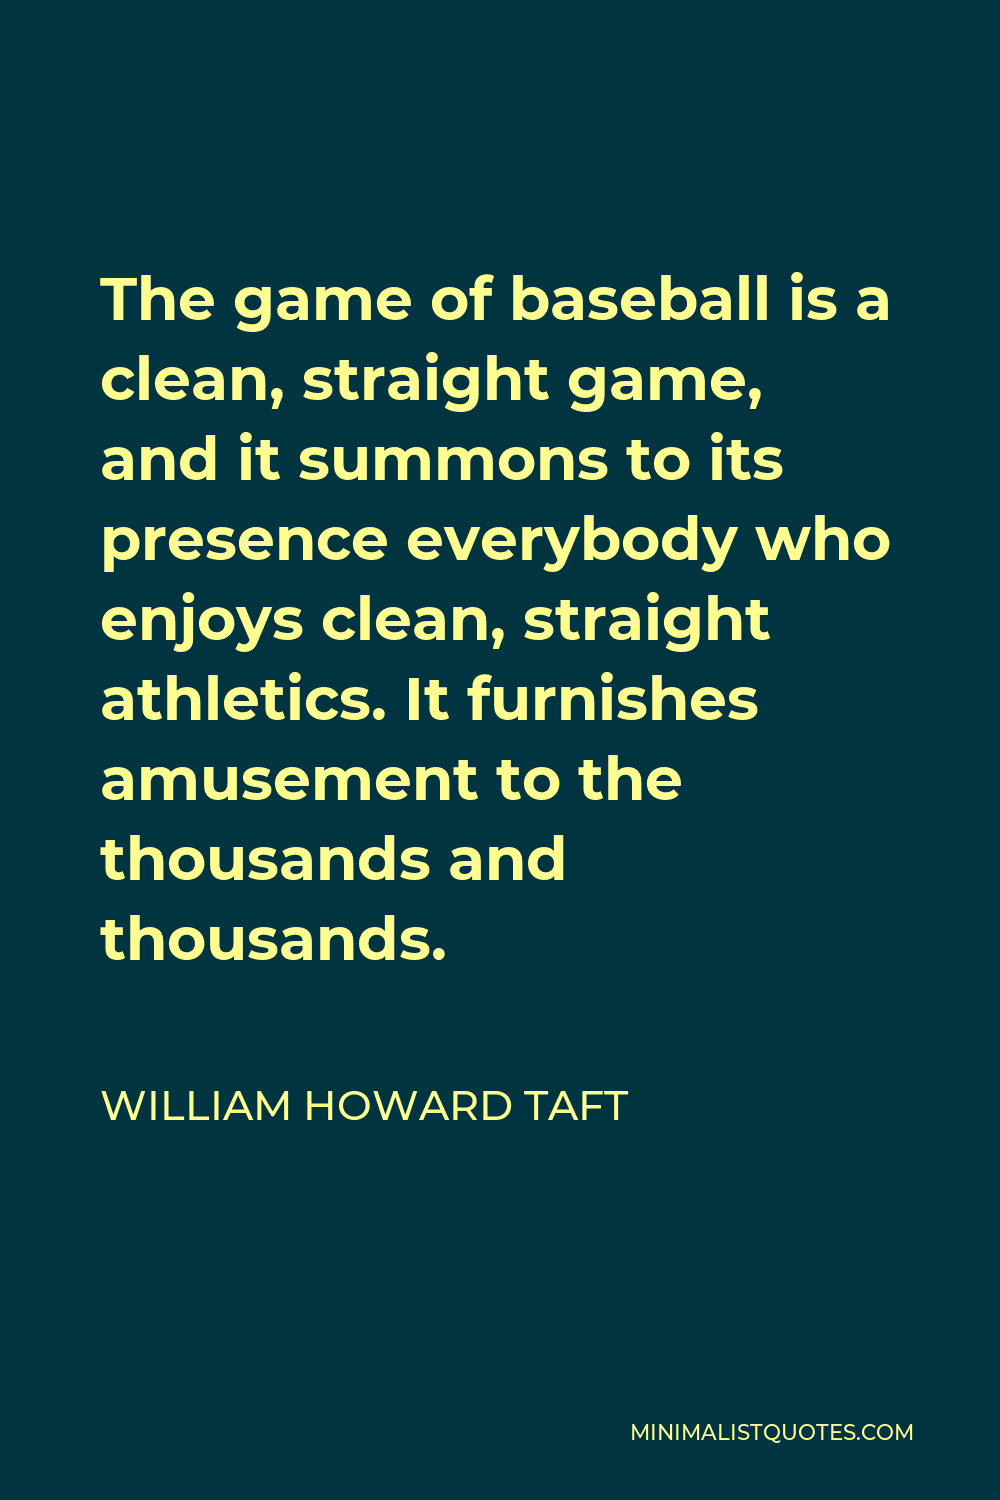 William Howard Taft Quote - The game of baseball is a clean, straight game, and it summons to its presence everybody who enjoys clean, straight athletics. It furnishes amusement to the thousands and thousands.